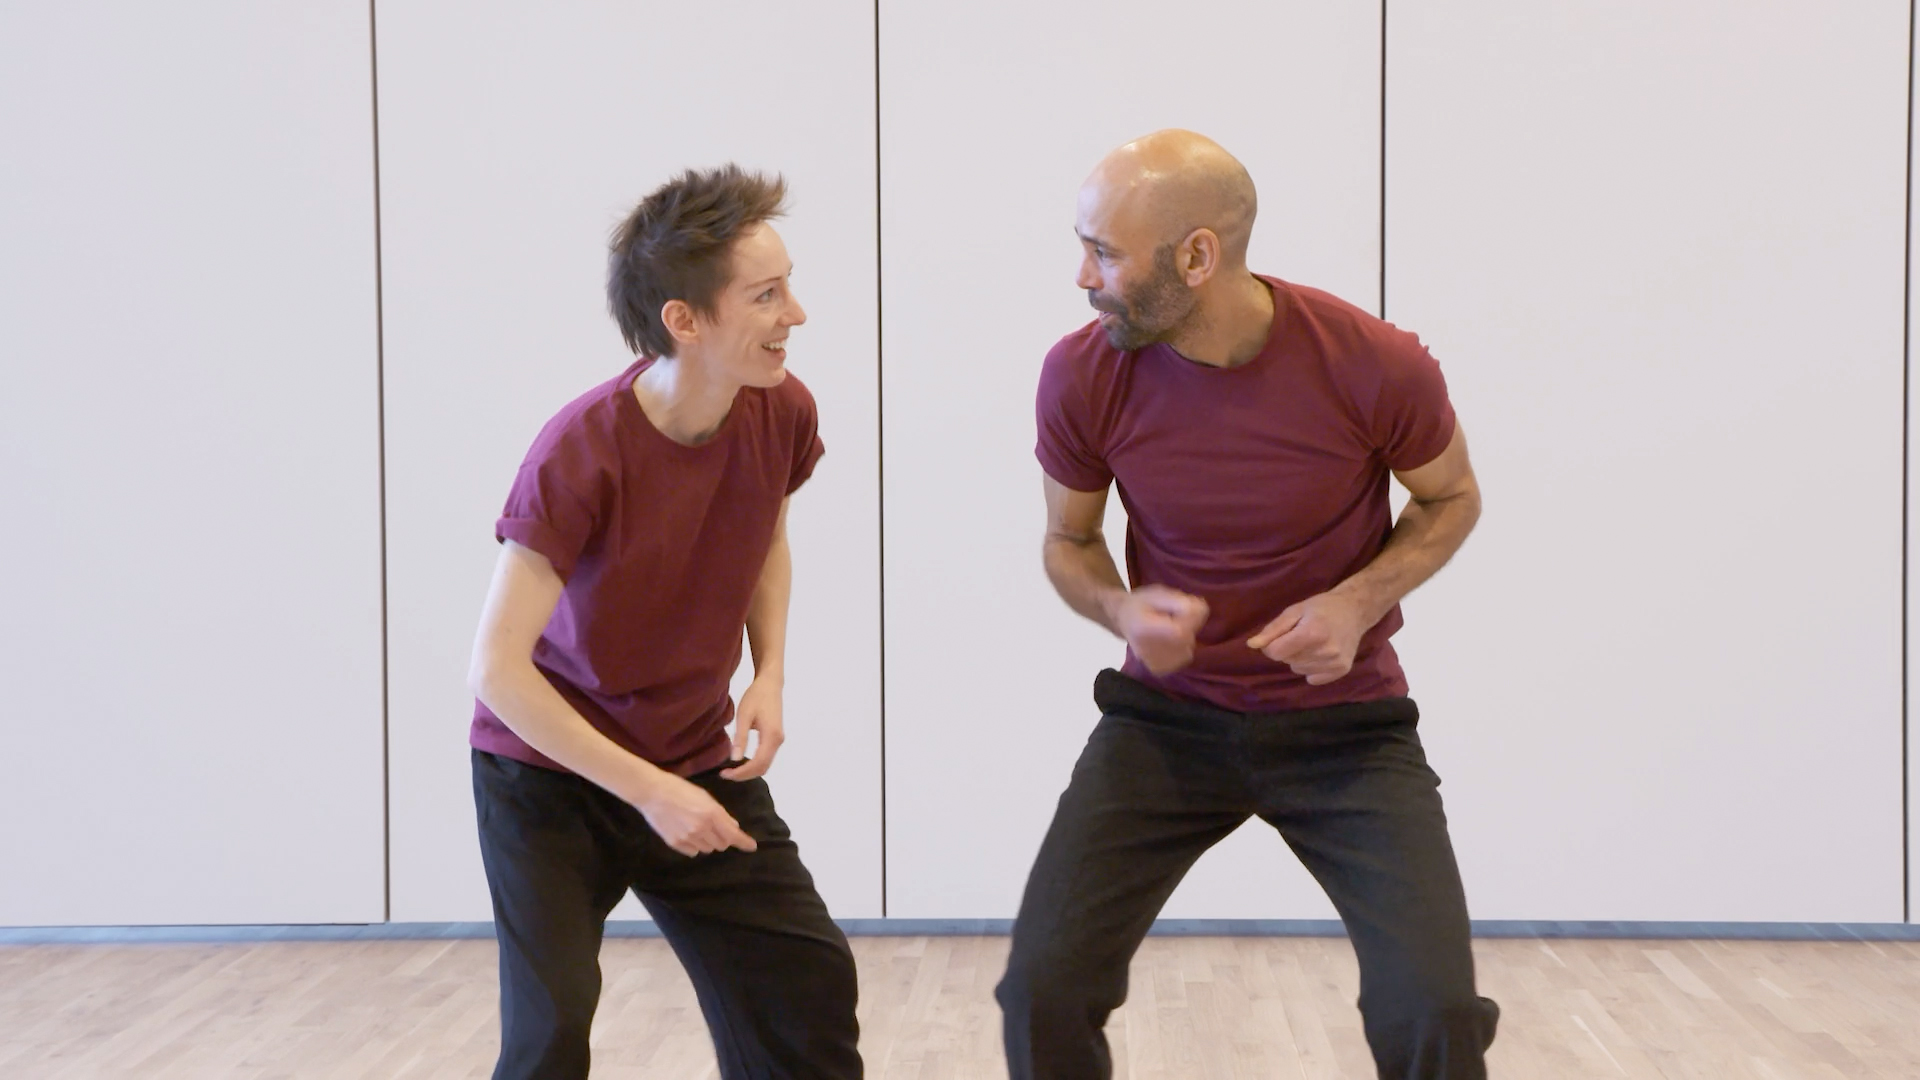 Lindy Hop tutorial 1. Dancers Wendy, a white woman with spiky brown hair, and Temujin, a man with brown skin and closely shaved head, click their fingers